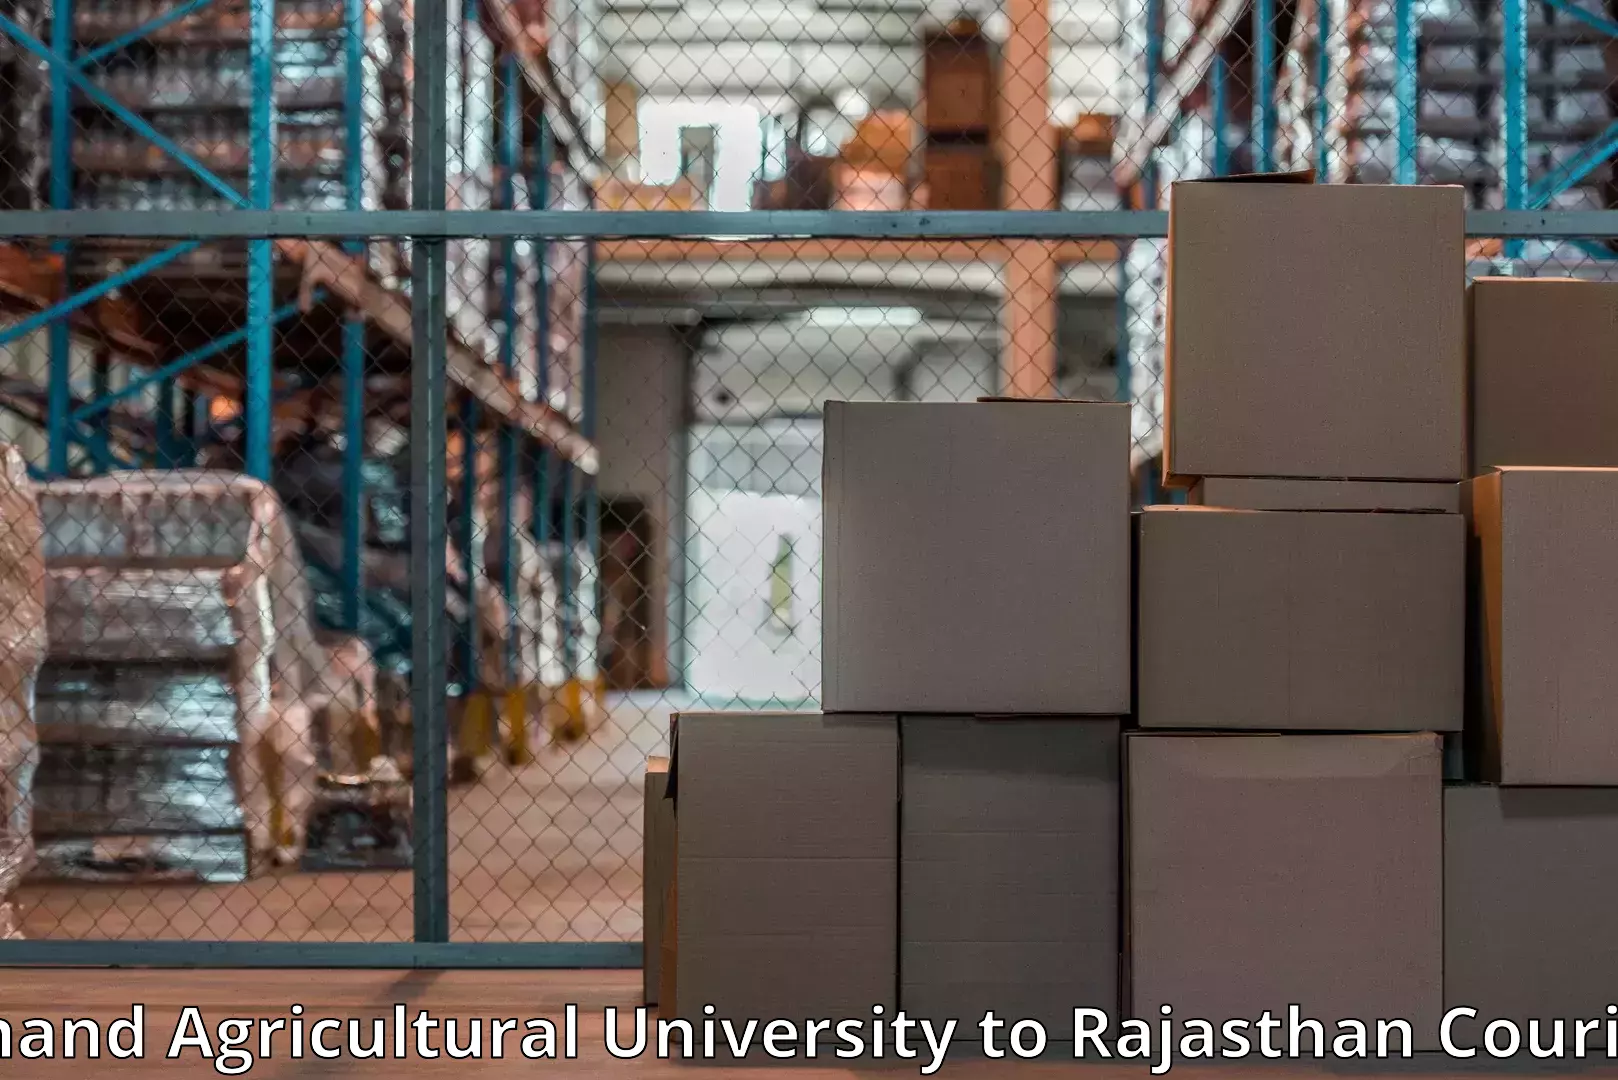 Furniture transport service Anand Agricultural University to Makrana